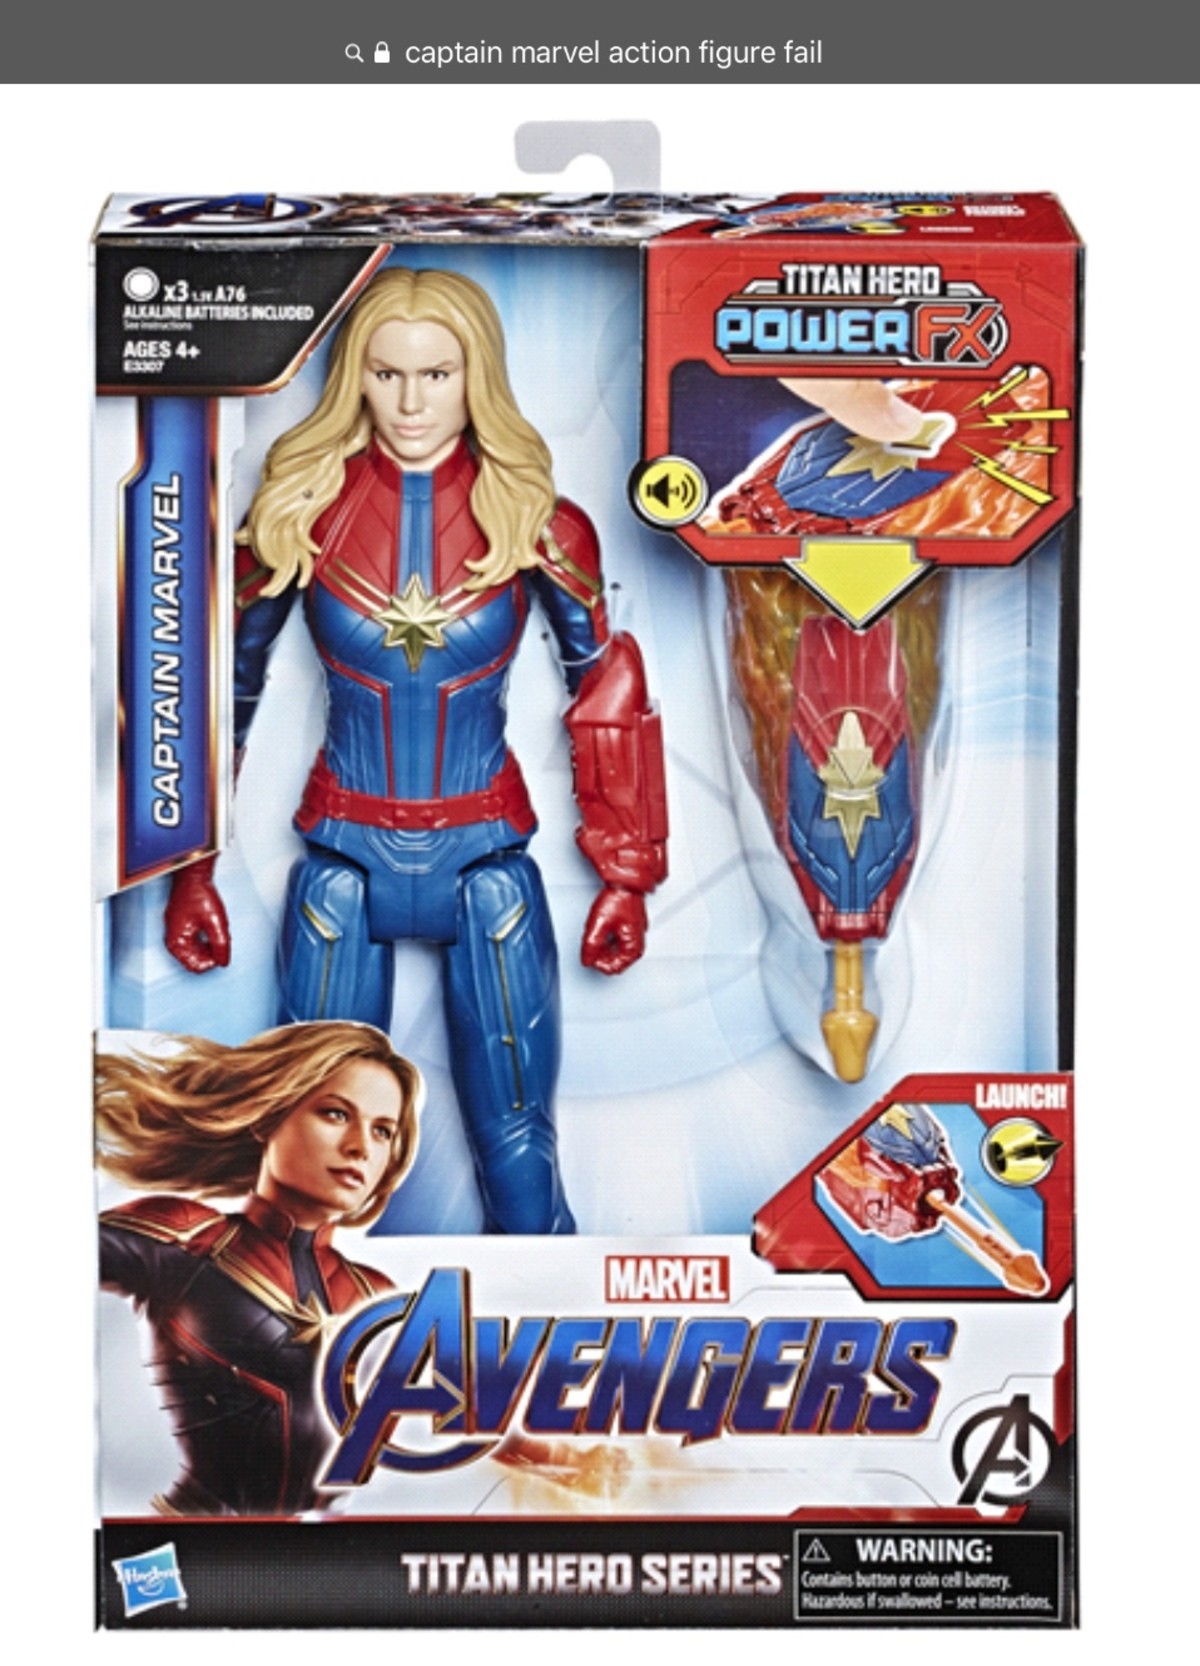 They captured Brie’s resting face on the doll perfectly!. .. the box art looks more like her the actress who plays super girl in the tv show